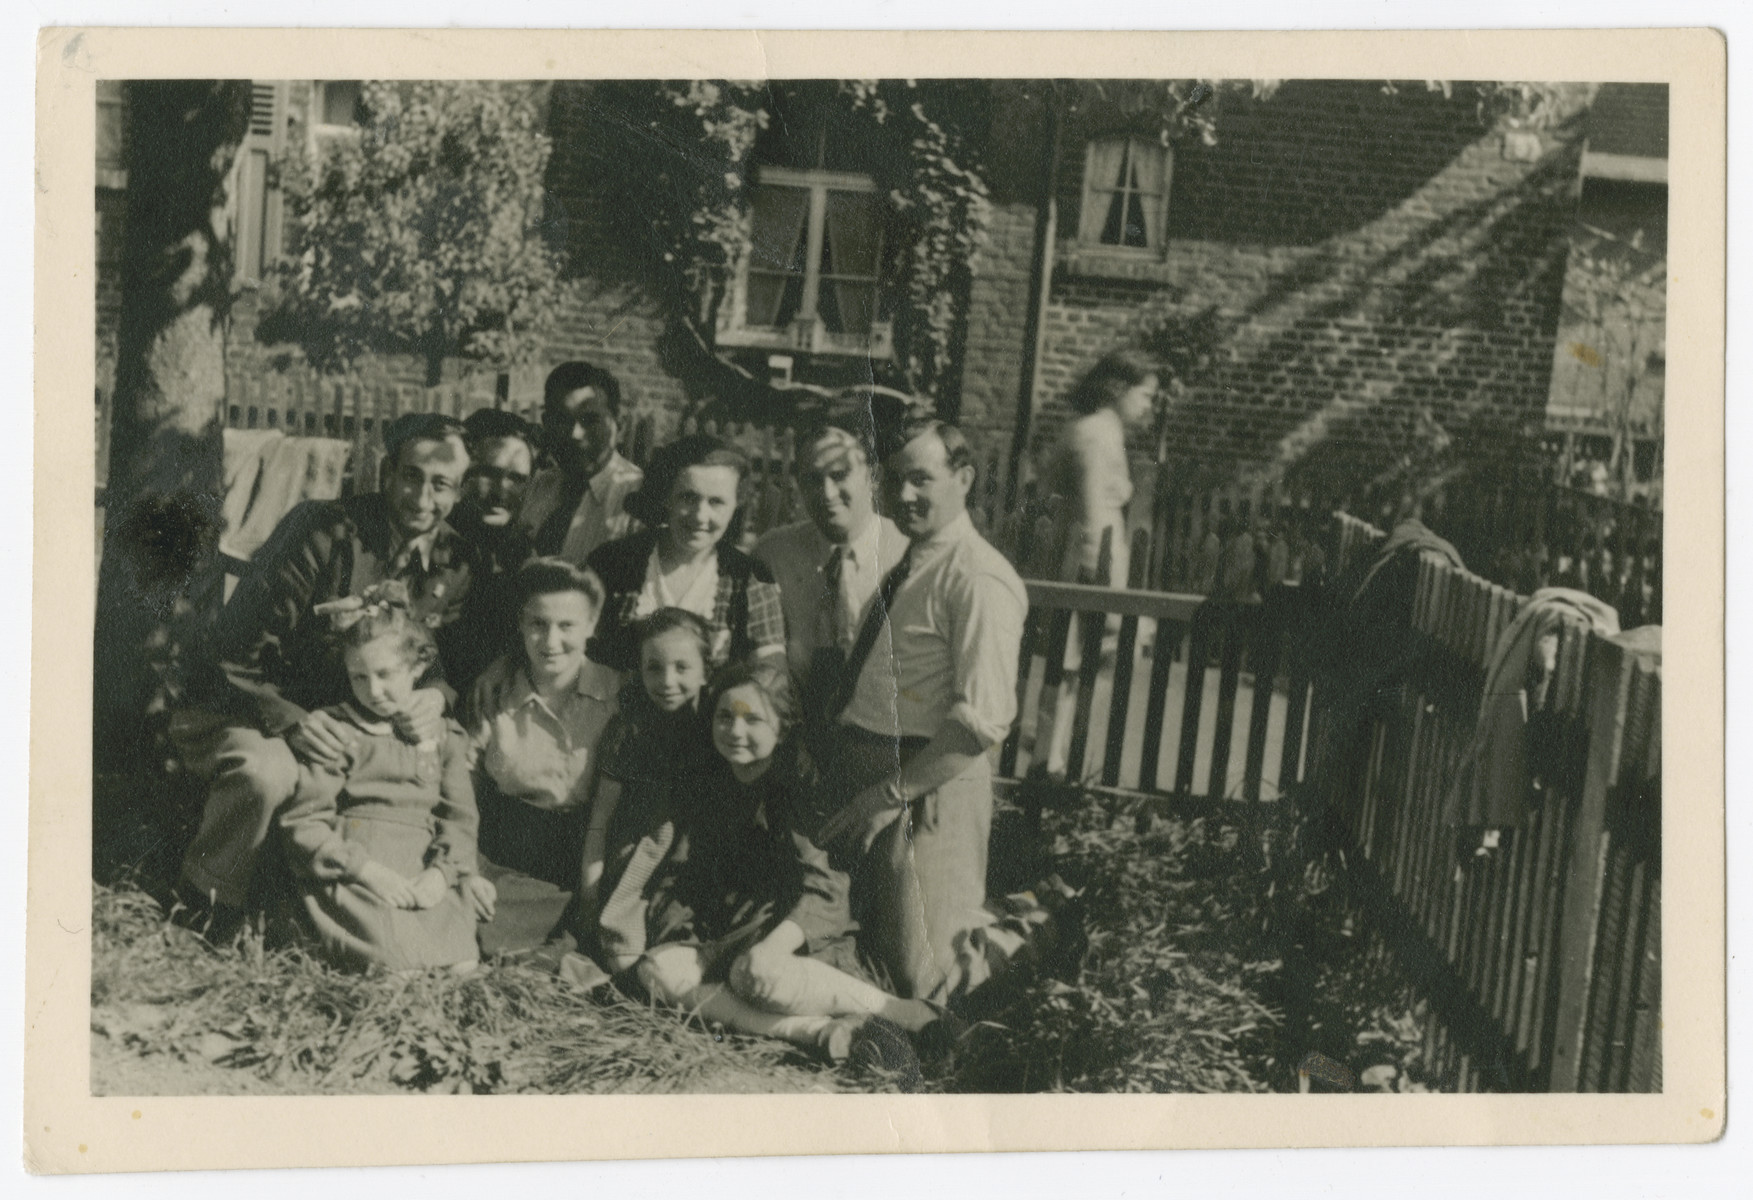 A group of men, women and children poses in a garden of the Zeilsheim displaced persons camp.

Miriam Pomerantz is sitting in the center.